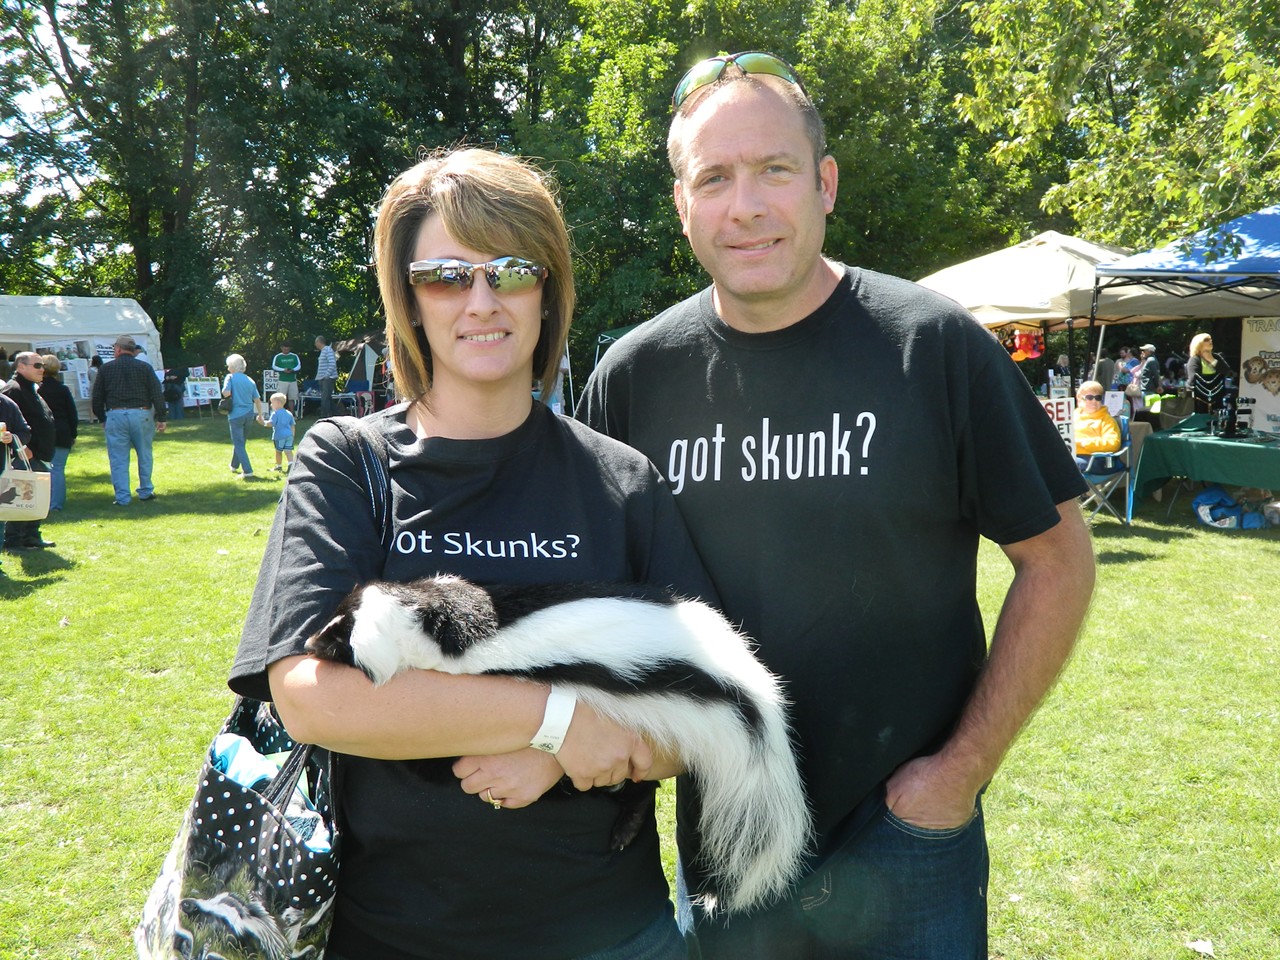 Here's What You Missed at Cleveland's 12th Annual Skunk Fest